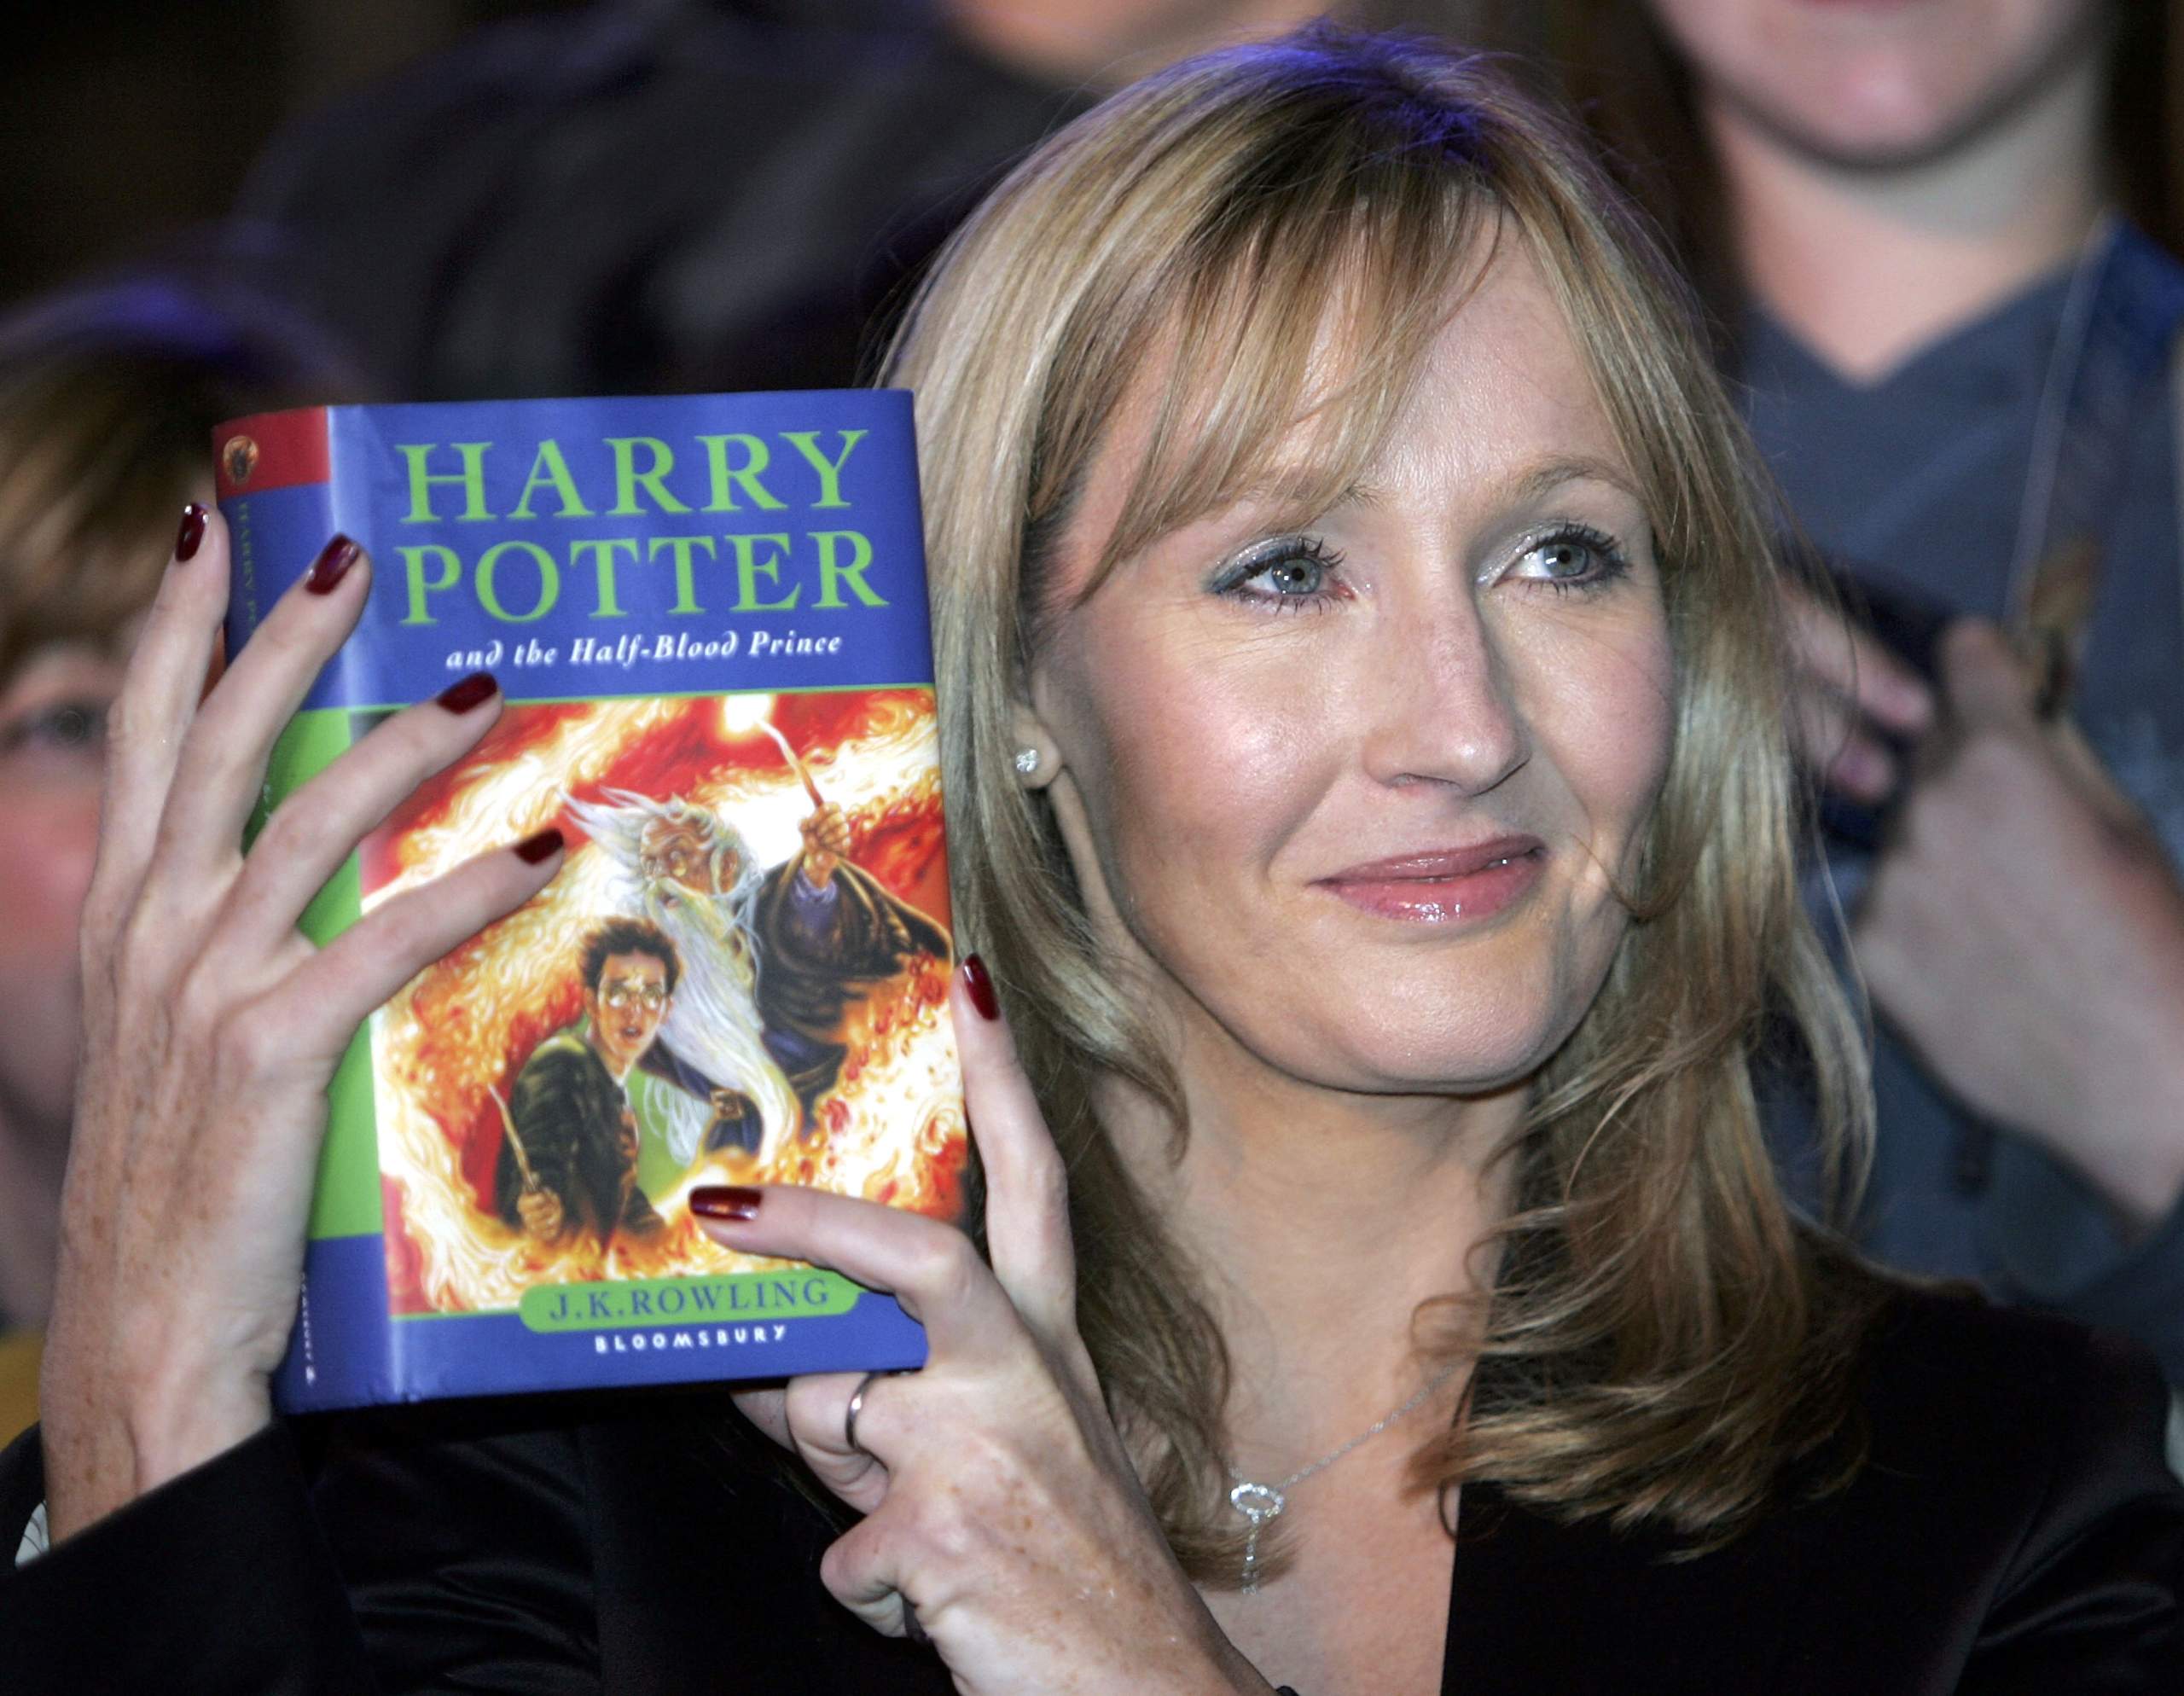 J.K. Rowling the actress? There was a real possibility that Rowling would've gotten the opportunity to star in the film representation of the series she penned. She was offered the chance to play Harry's deceased mother in the films. Interestingly enough, Rowling bore an uncanny resemblance to the description she had created for Lily Potter. <br> <br> She instead ultimately declined in favor of focusing on the shaping of the films, as well as the casting responsibilities she had sitting in her lap. Instead, the role went to an actress named Geraldine Somerville. If you placed Somerville alongside Rowling, you'd think they were twins.